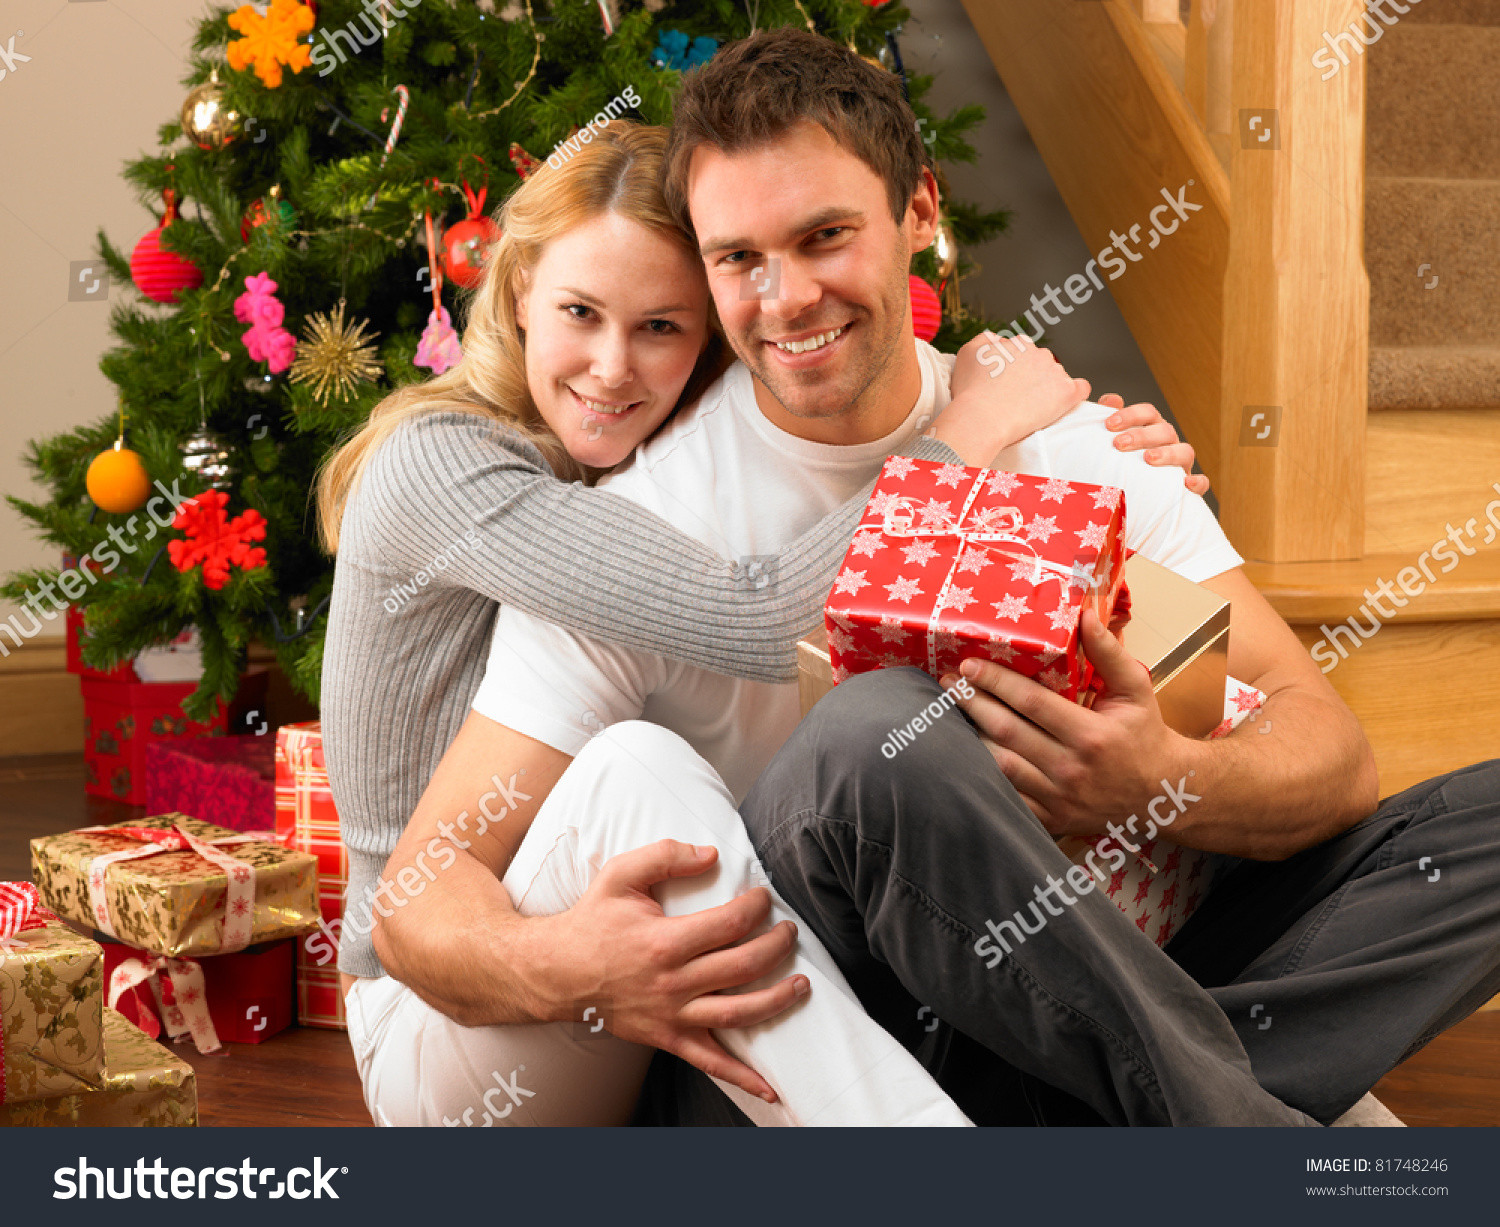 Gift Ideas For Young Couple
 Young Couple With Gifts In Front Christmas Tree Stock